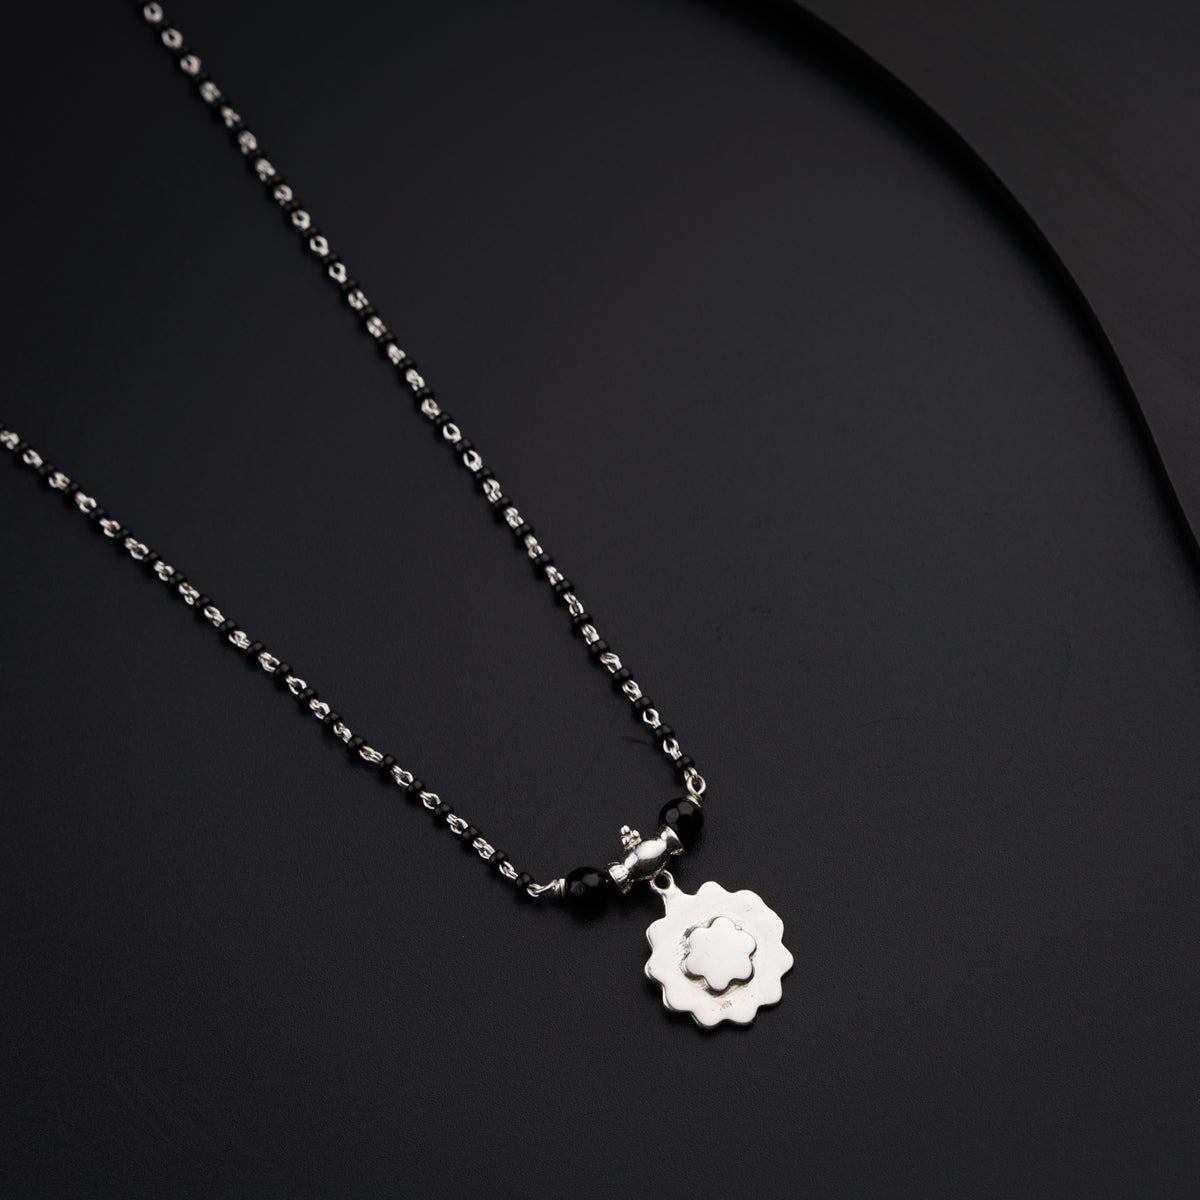 a black and white photo of a necklace with a flower on it